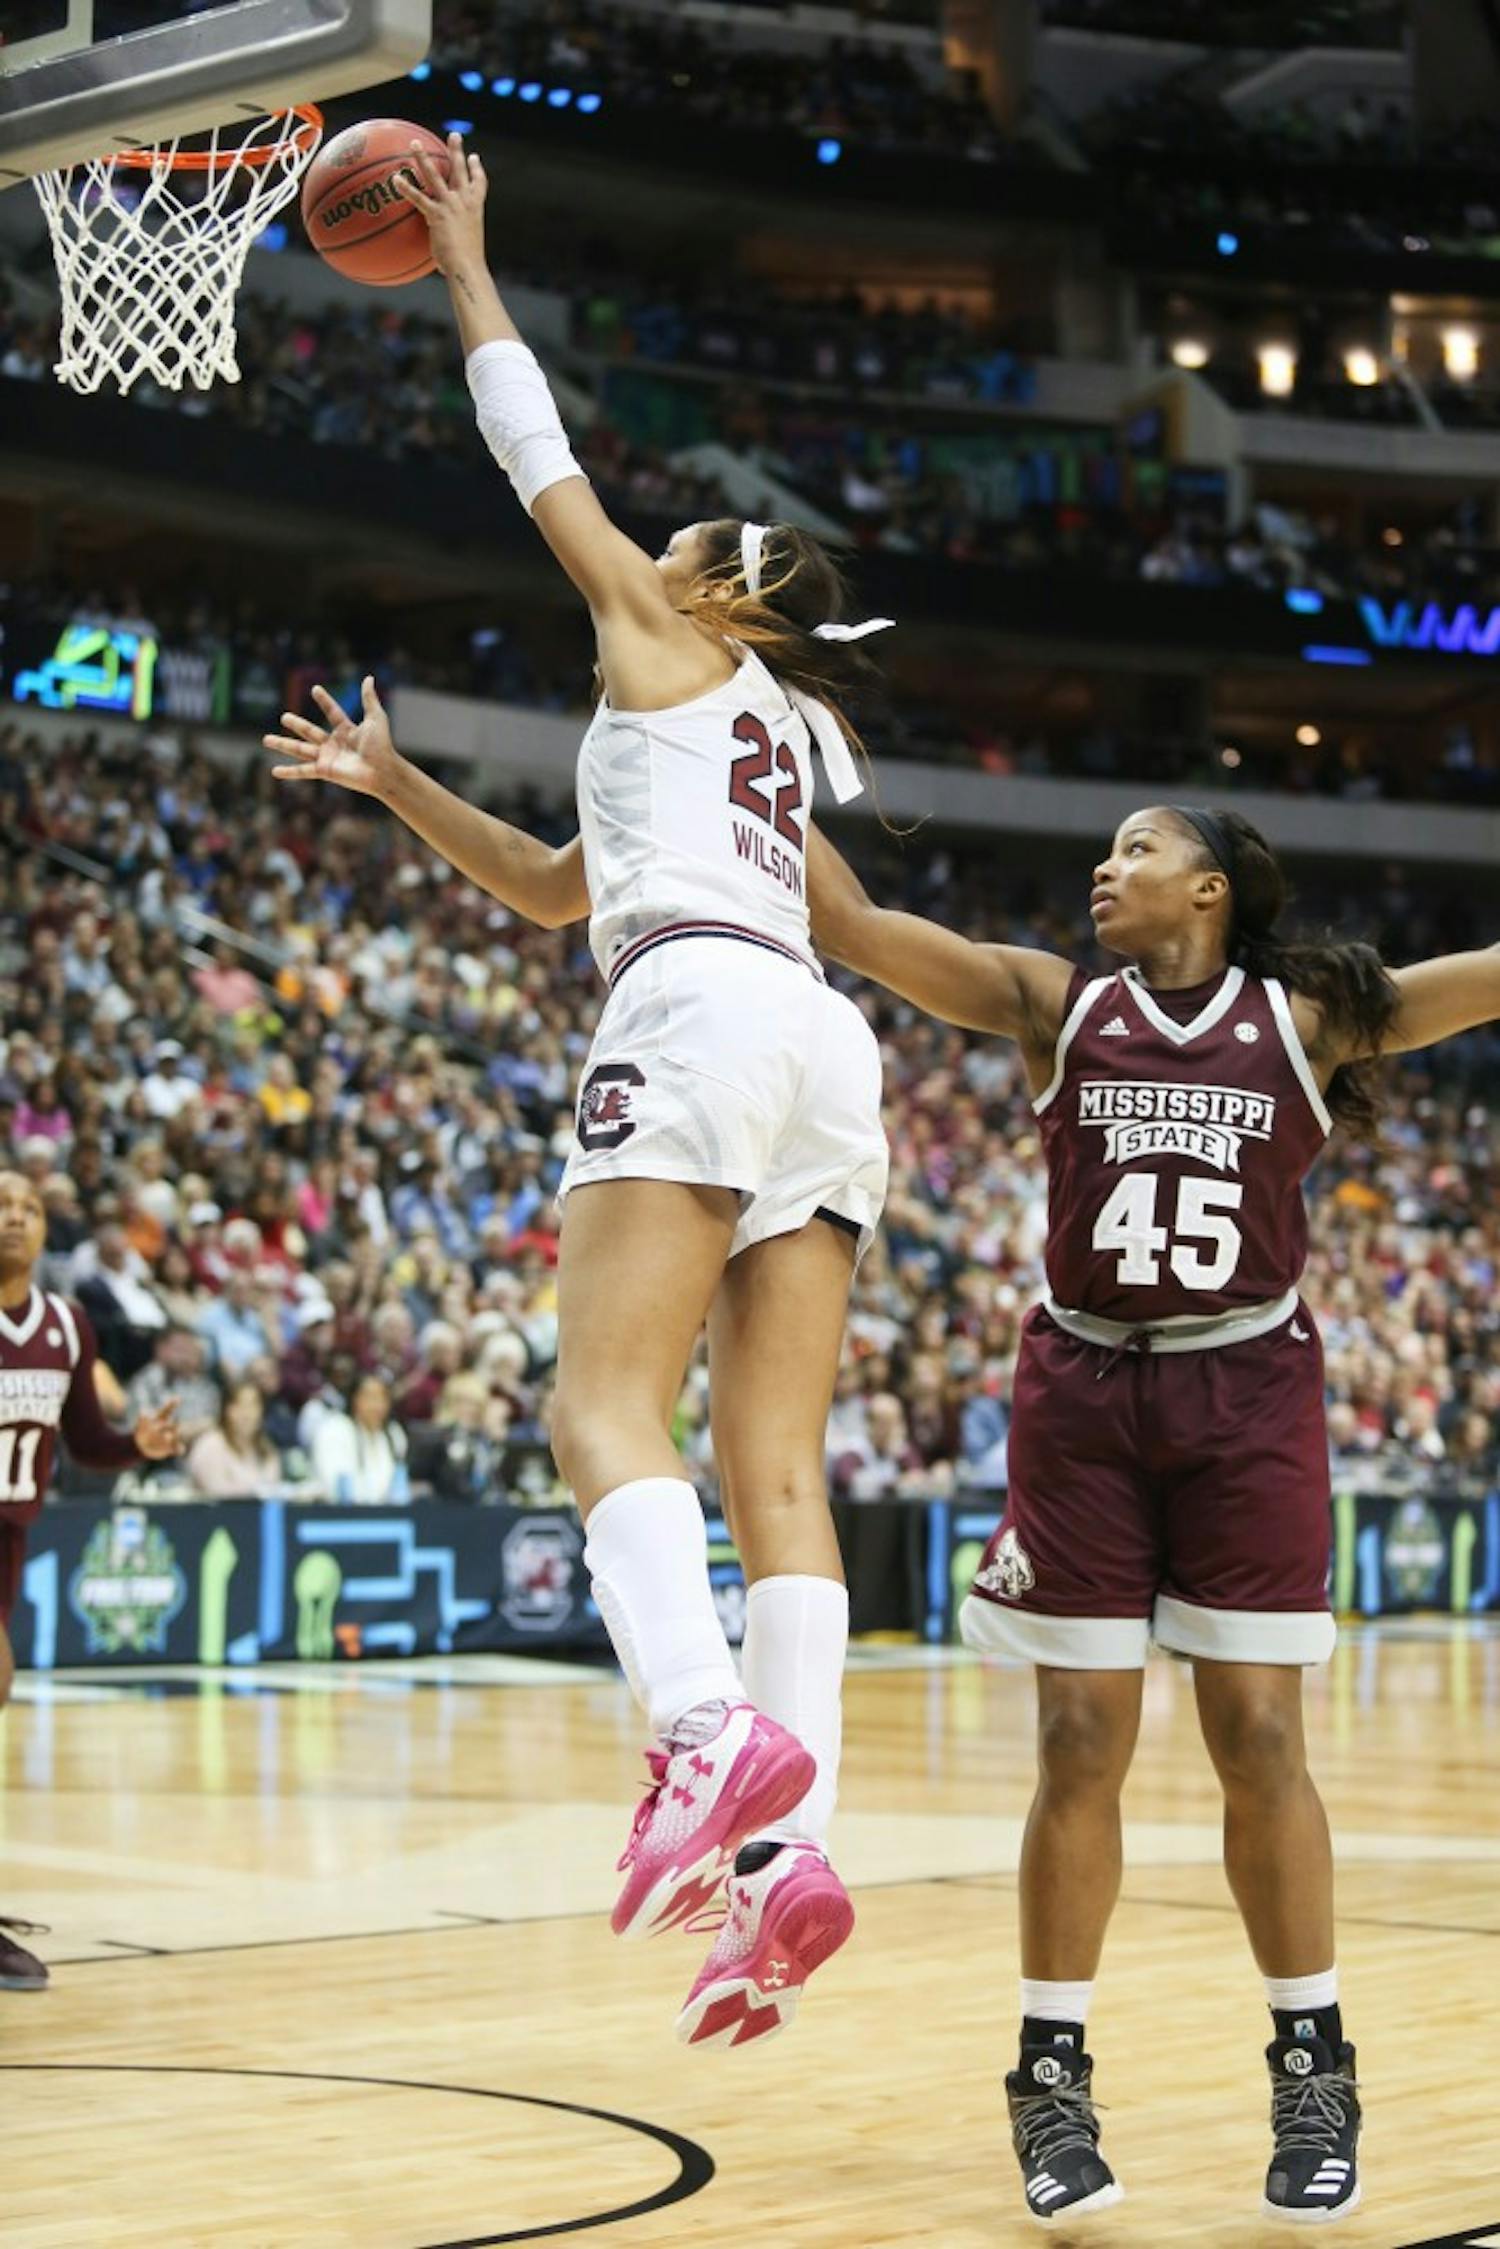 Junior forward A’ja Wilson goes in for a lay-up during the National Championship game against Mississippi State on April 2, 2017.